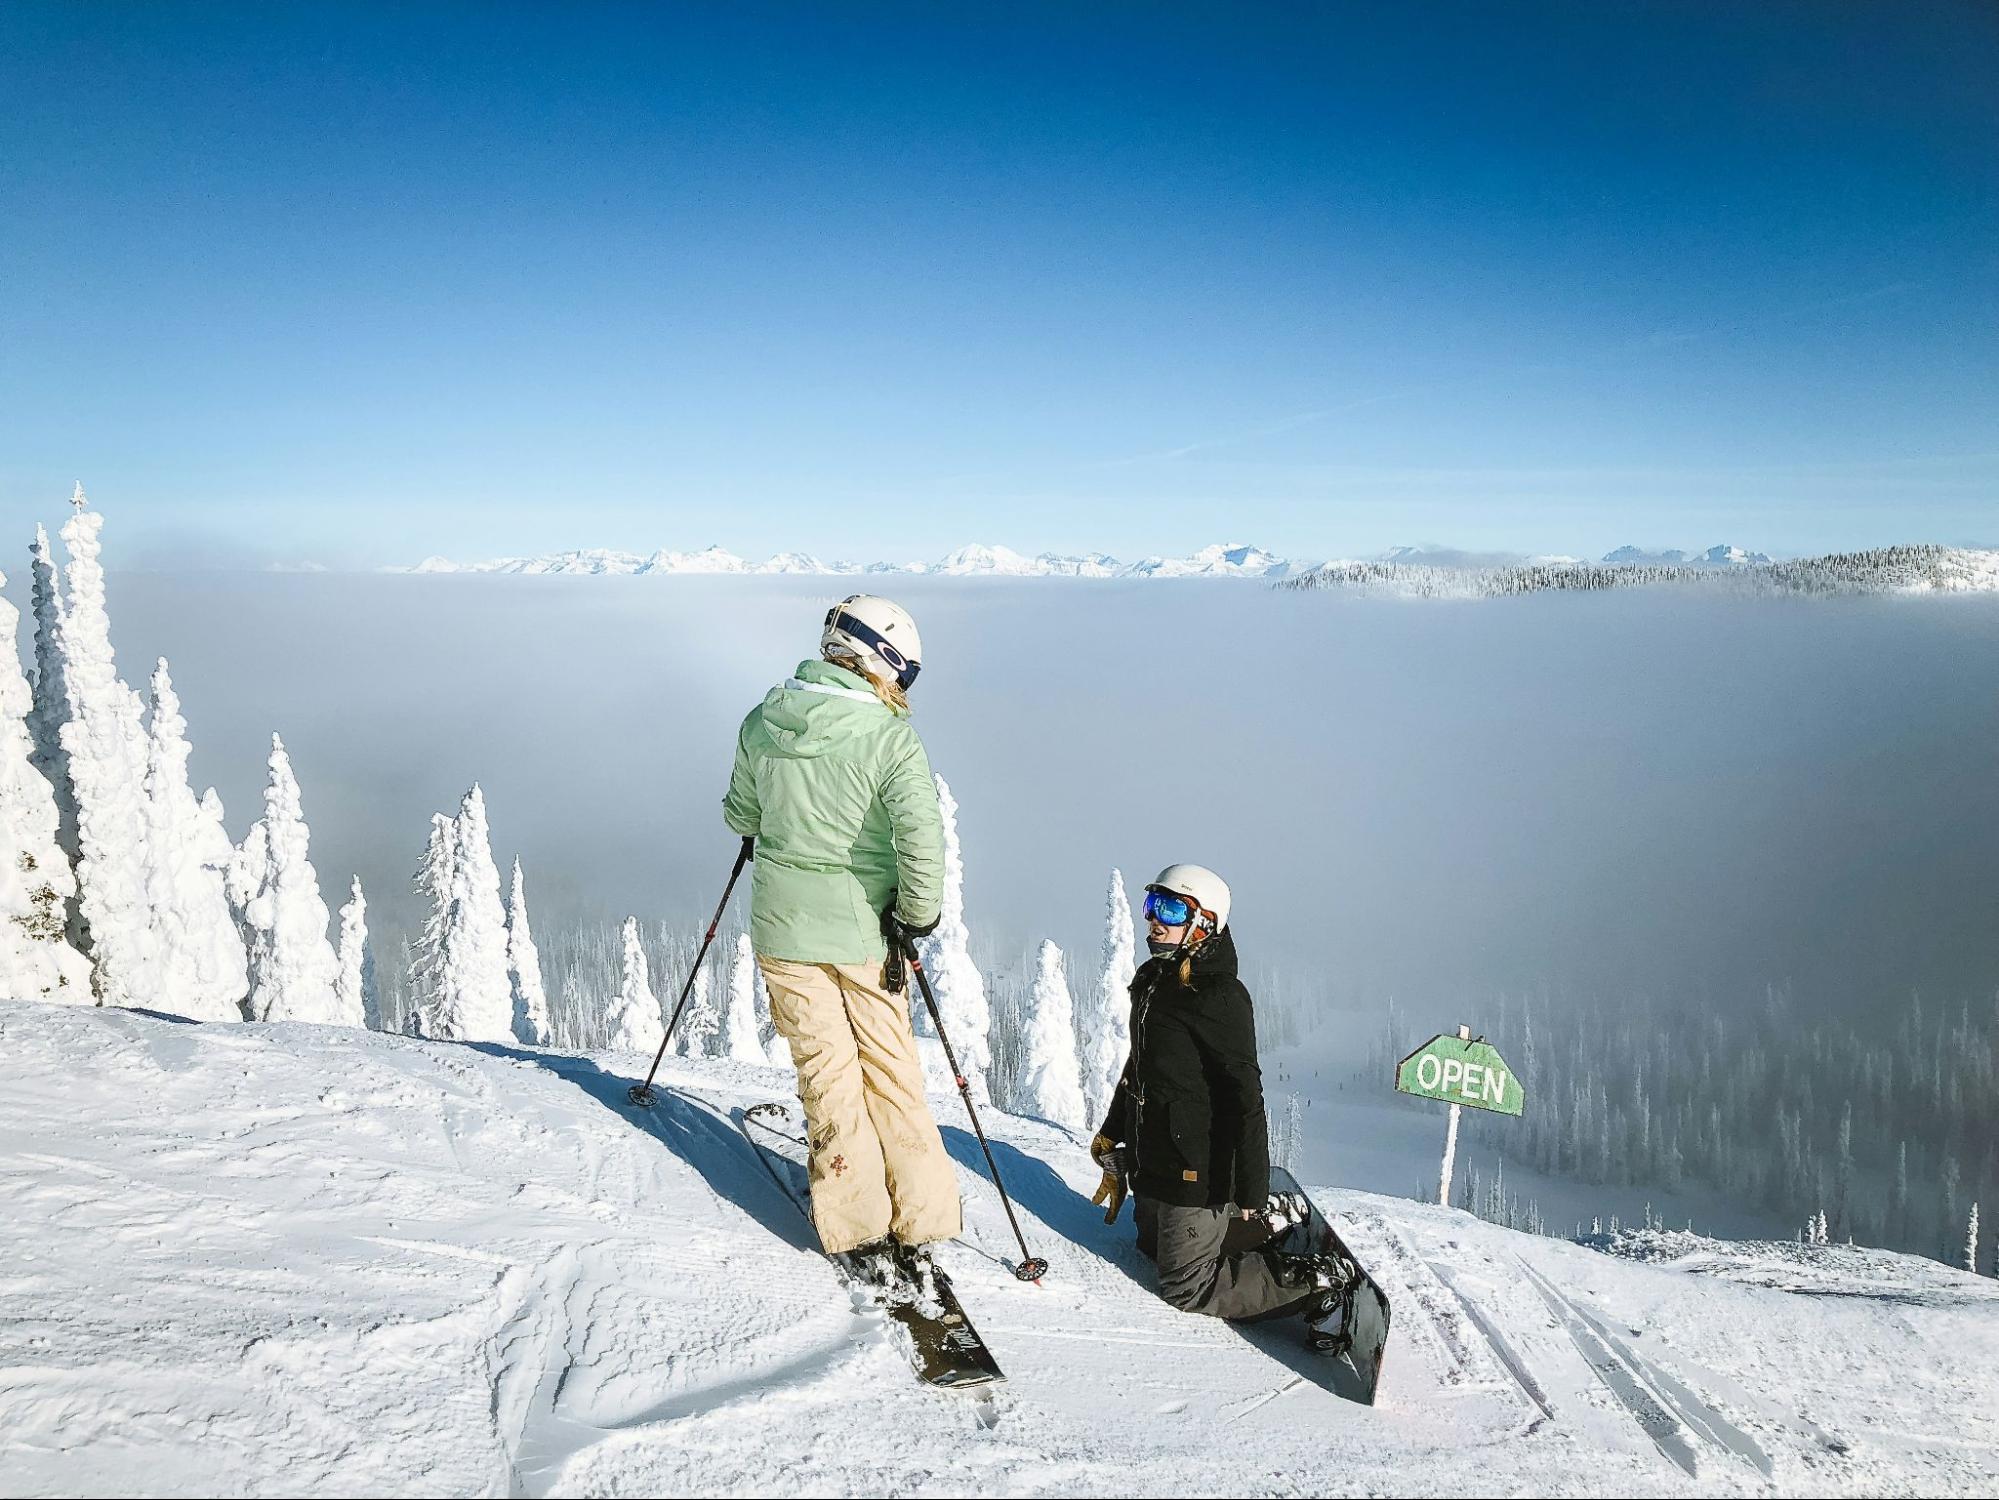 A skier and snowboarder at the top of a snowy slope.